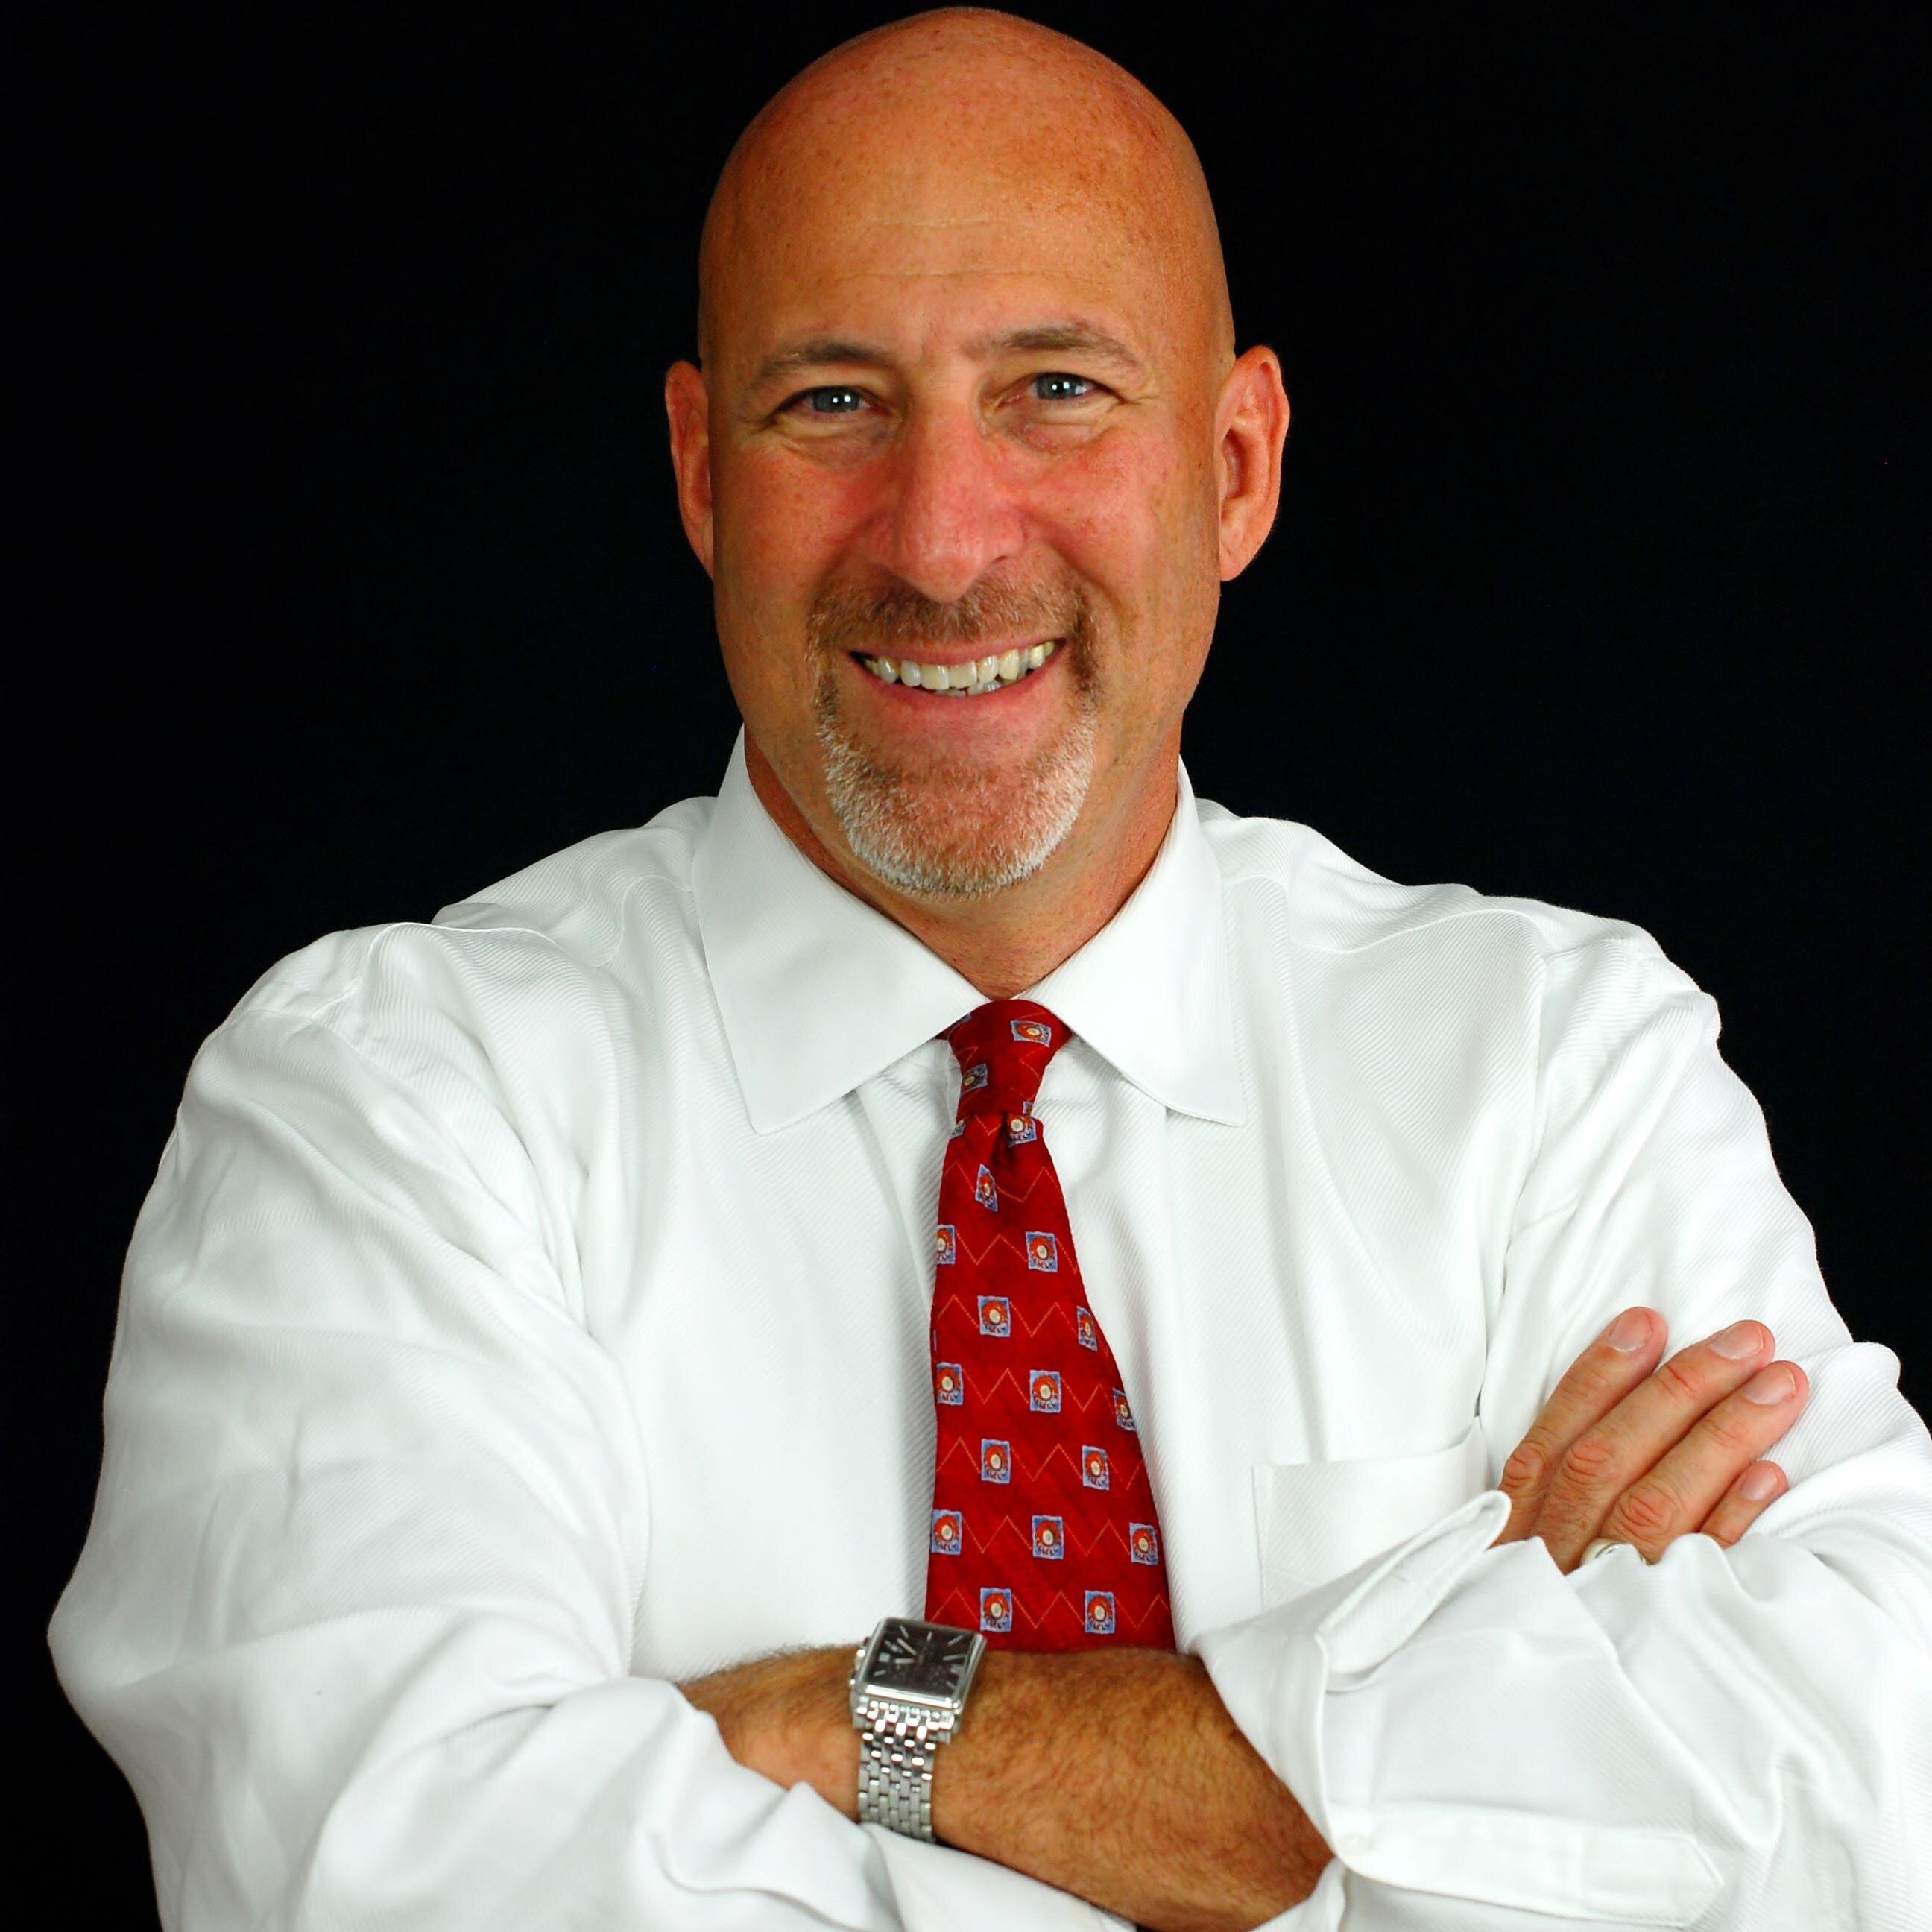 Leadership and Sales Coaching expert, Author of Roll Up Your Sleeves & Get To Work. Coach Rick speaks The BALD TRUTH